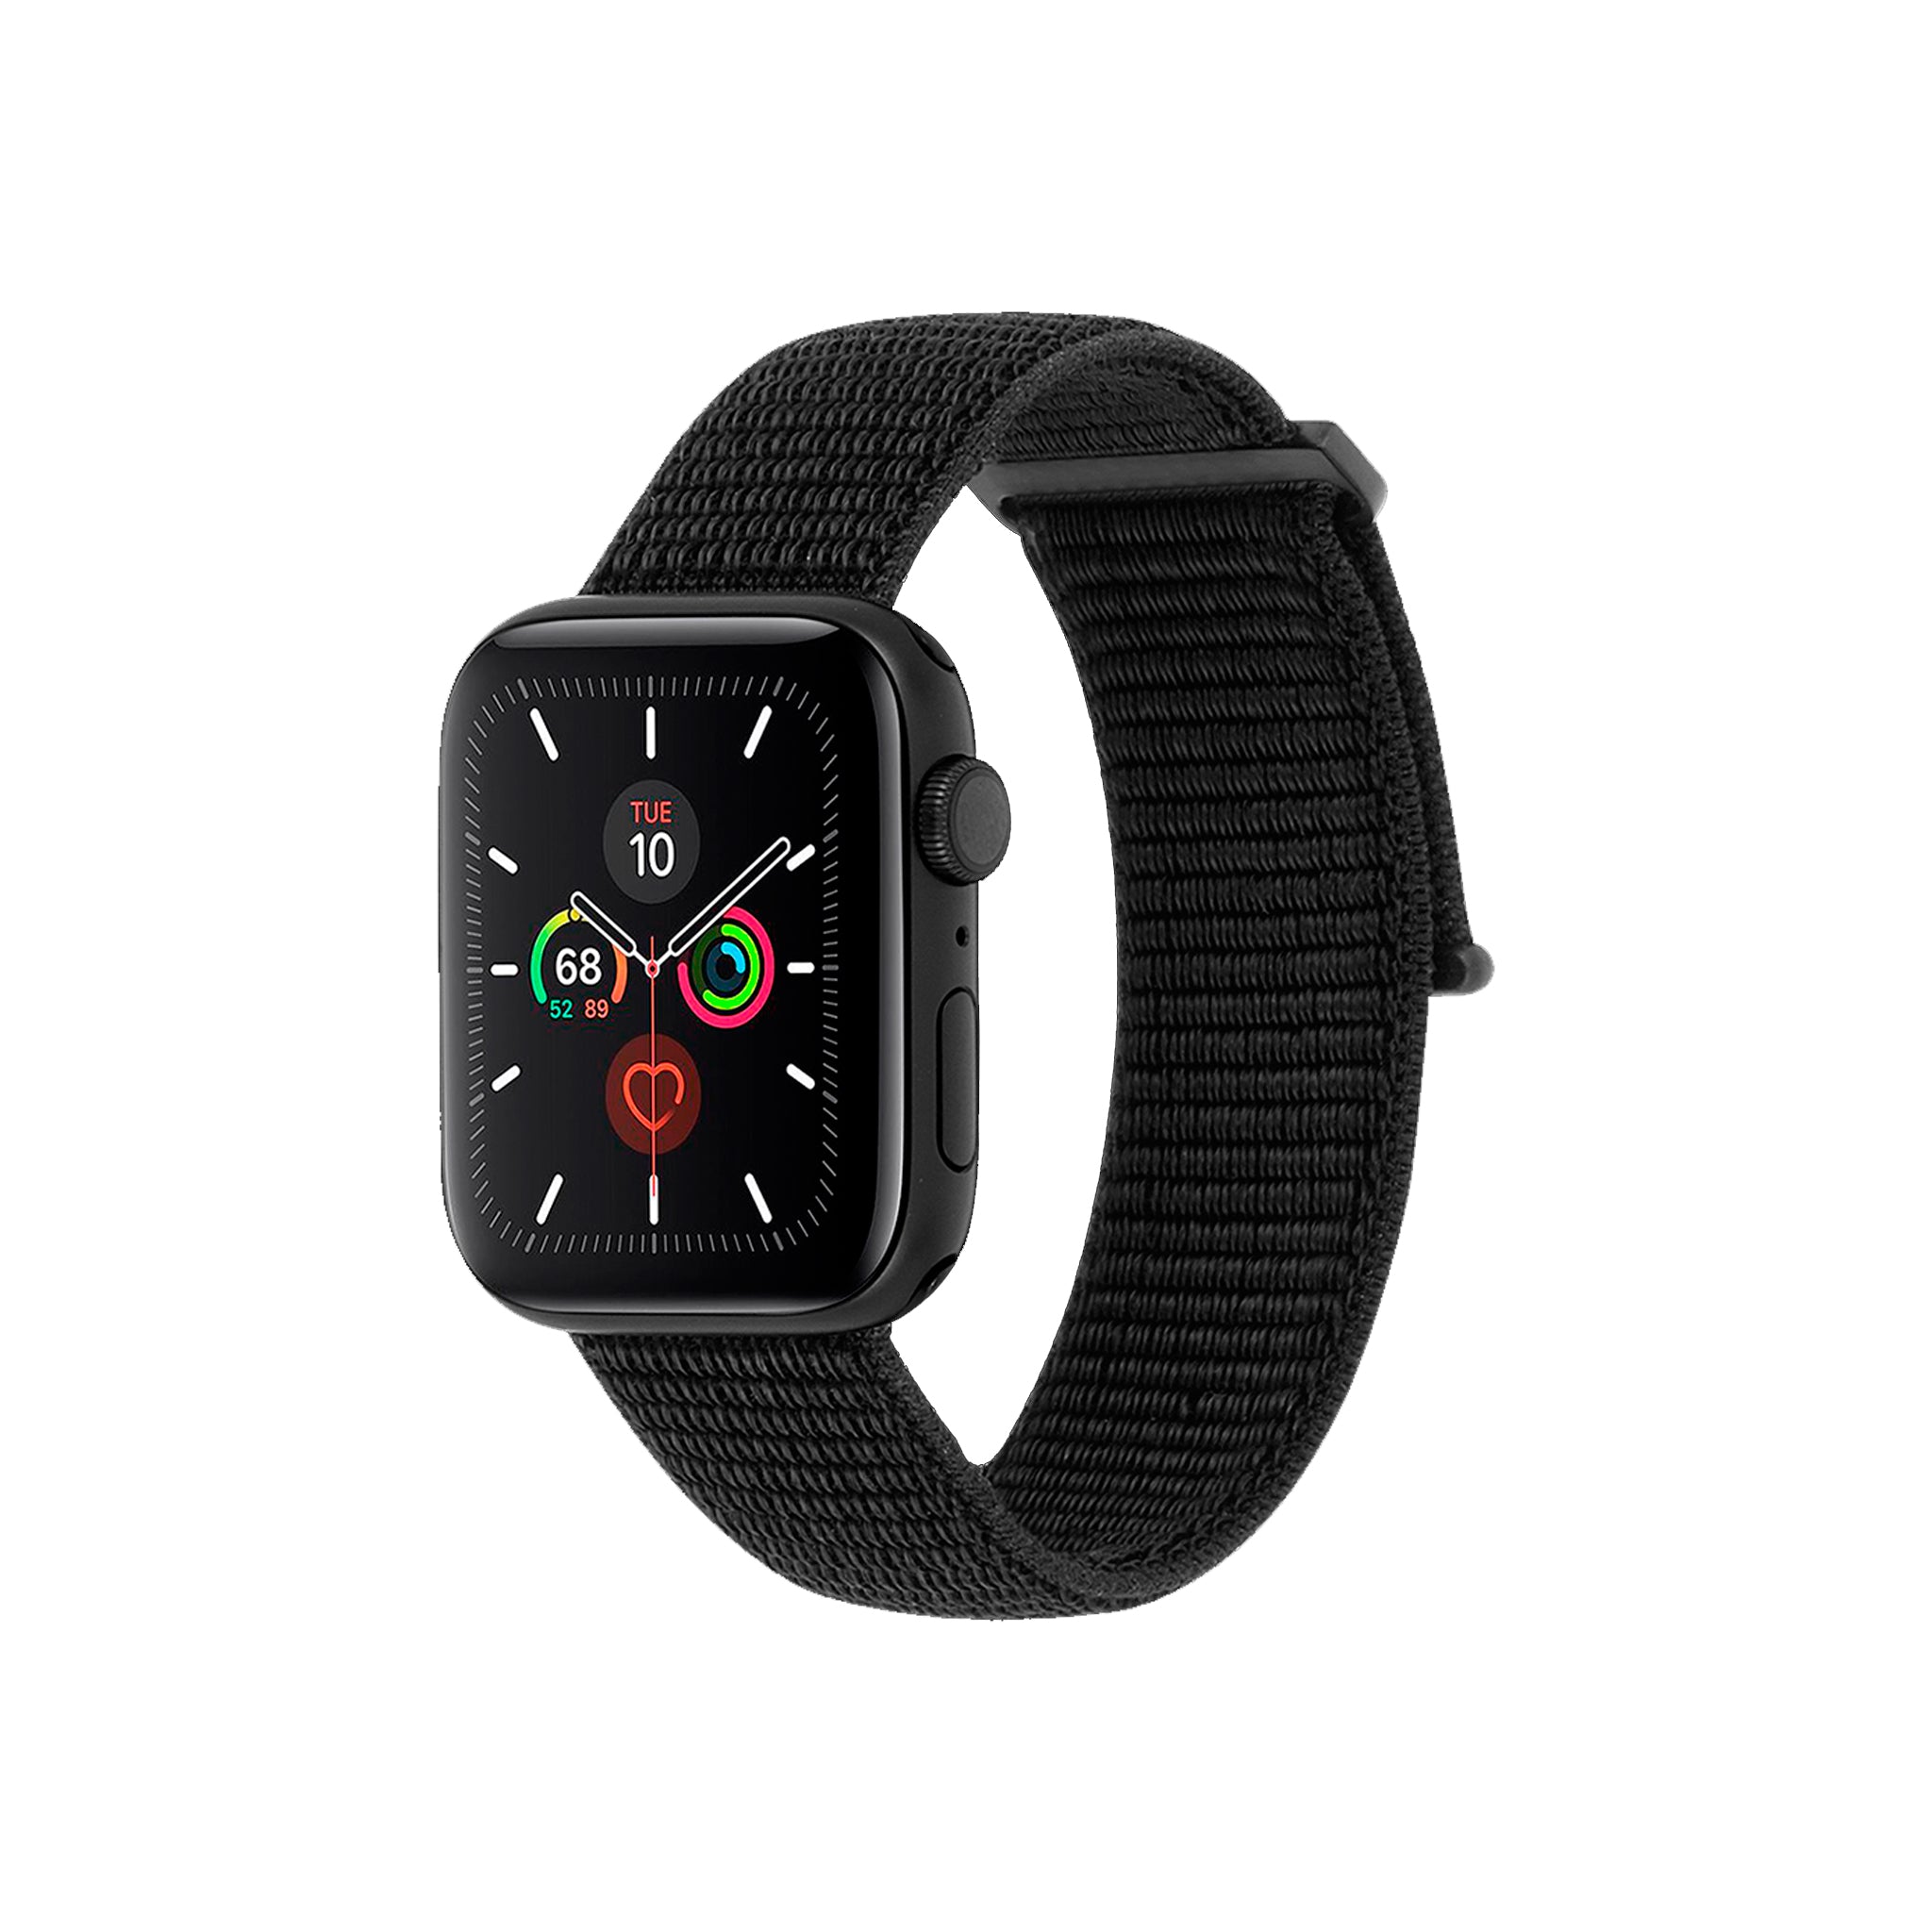 Case-mate - Nylon Watchband For Apple Watch 38mm / 40mm - Black